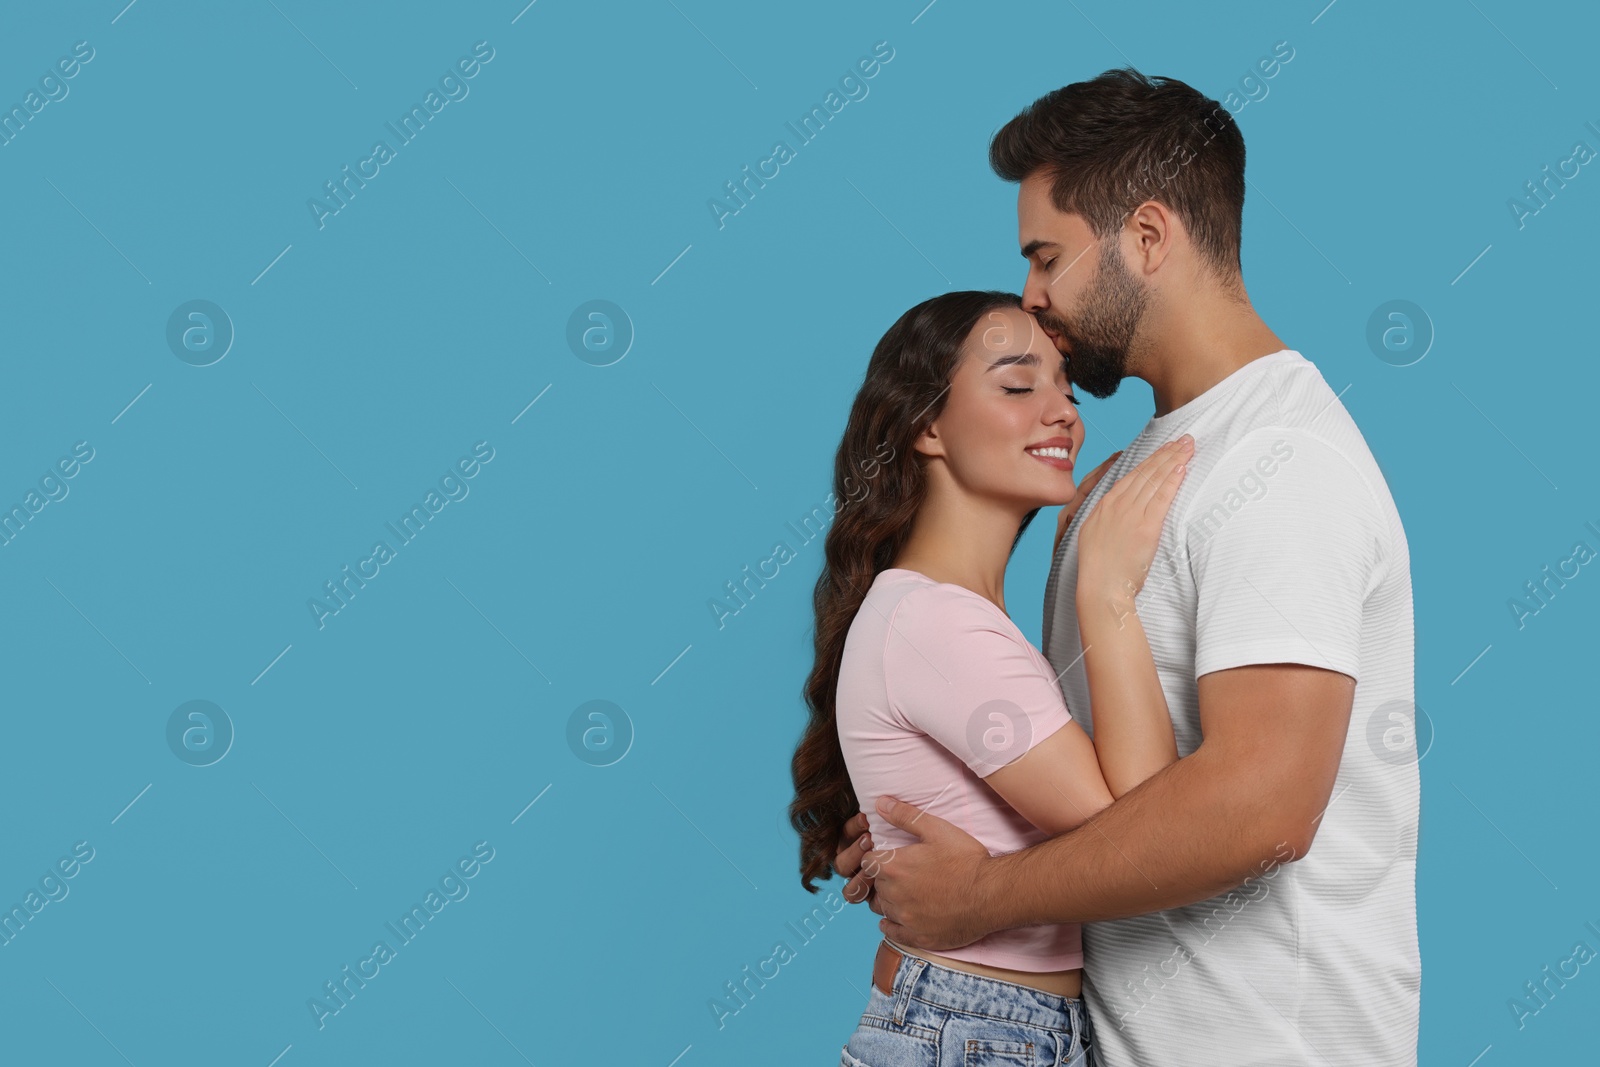 Photo of Man kissing his smiling girlfriend on light blue background. Space for text